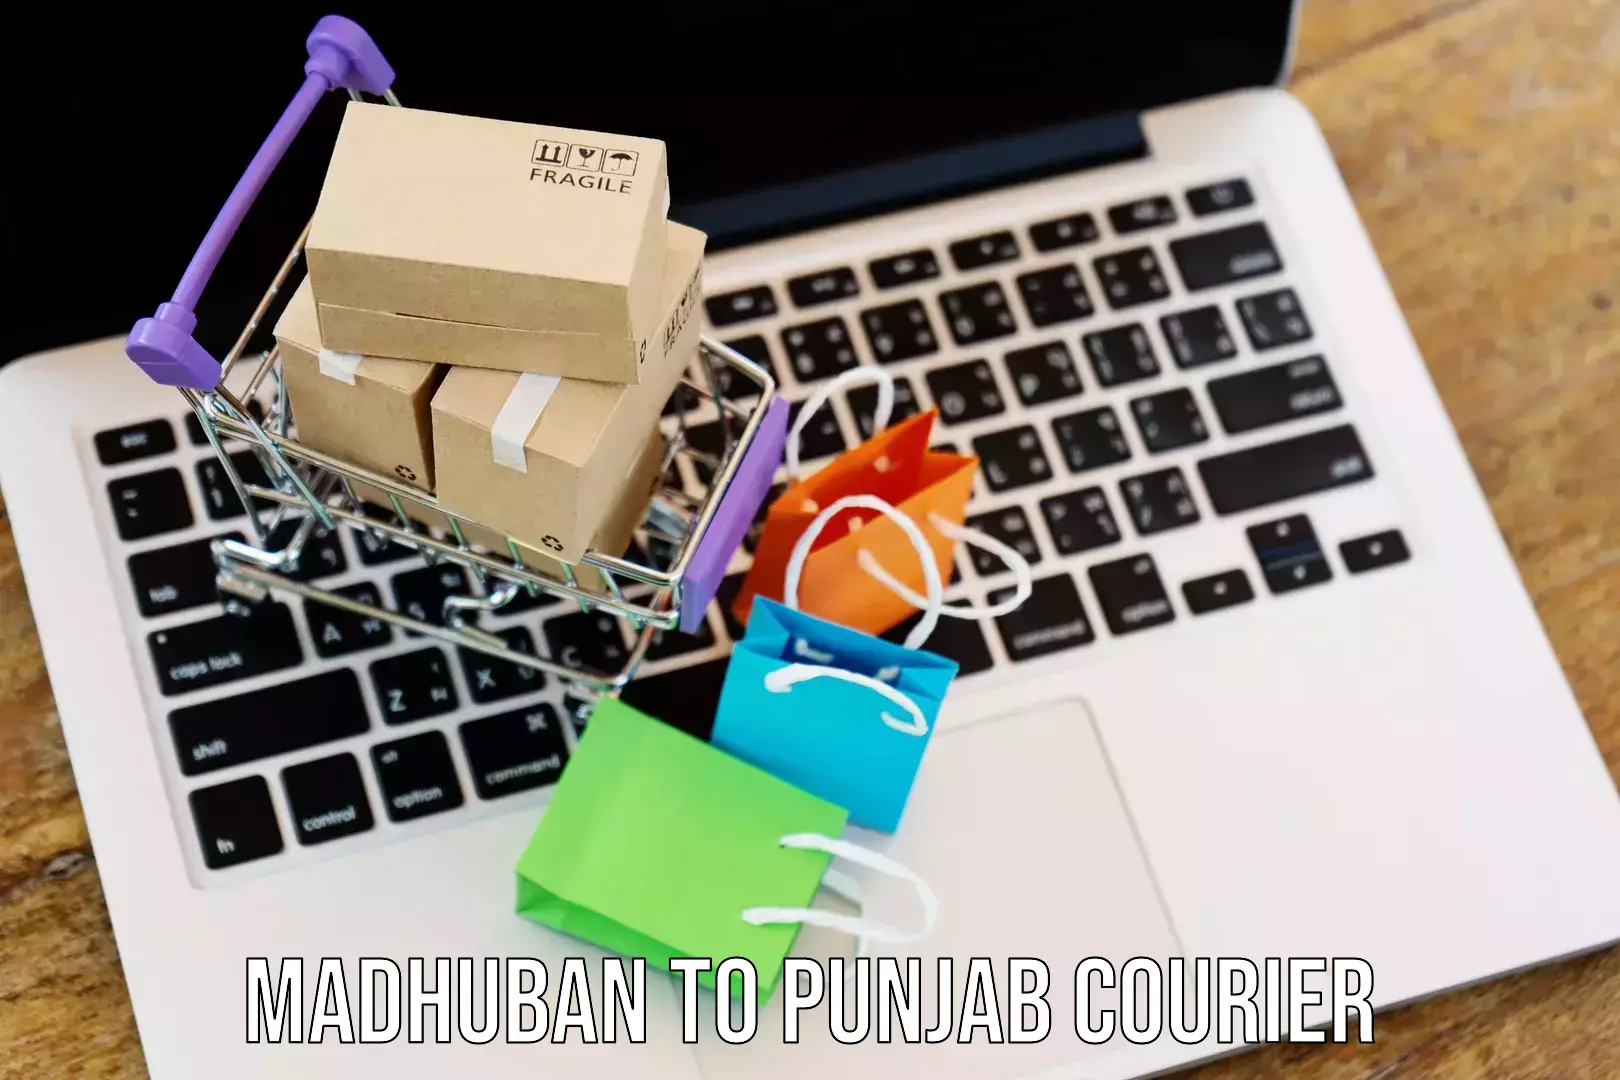 On-call courier service Madhuban to Punjab